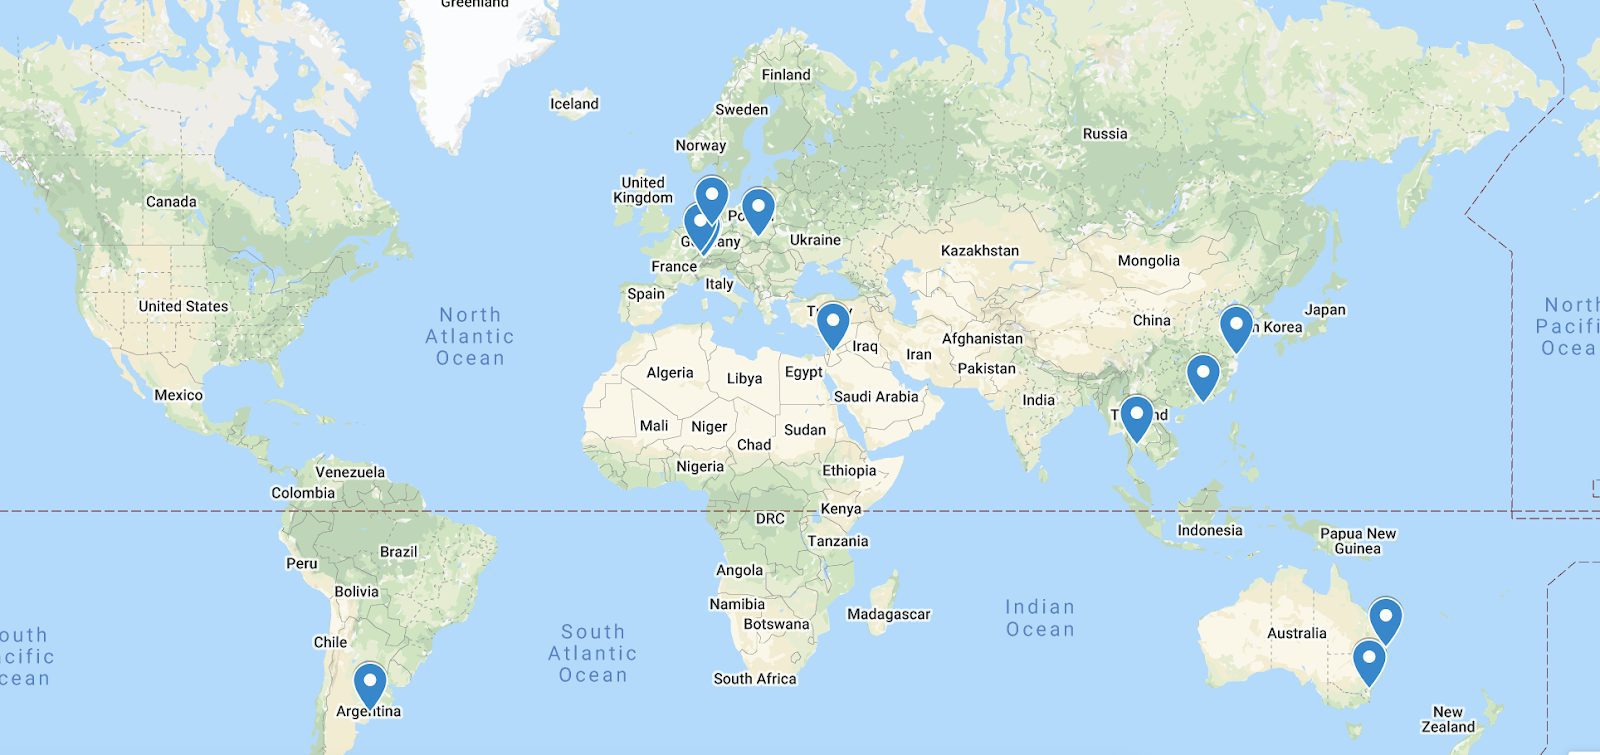 map showing participants located all over the world